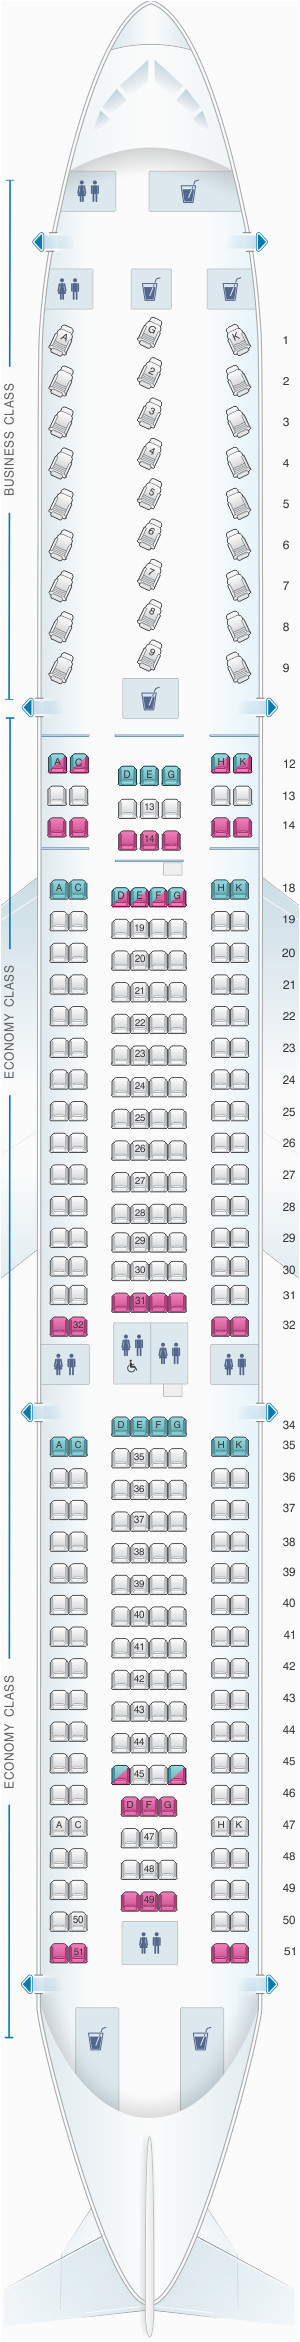 Air Canada 321 Seat Map Boeing 787 Seat Map